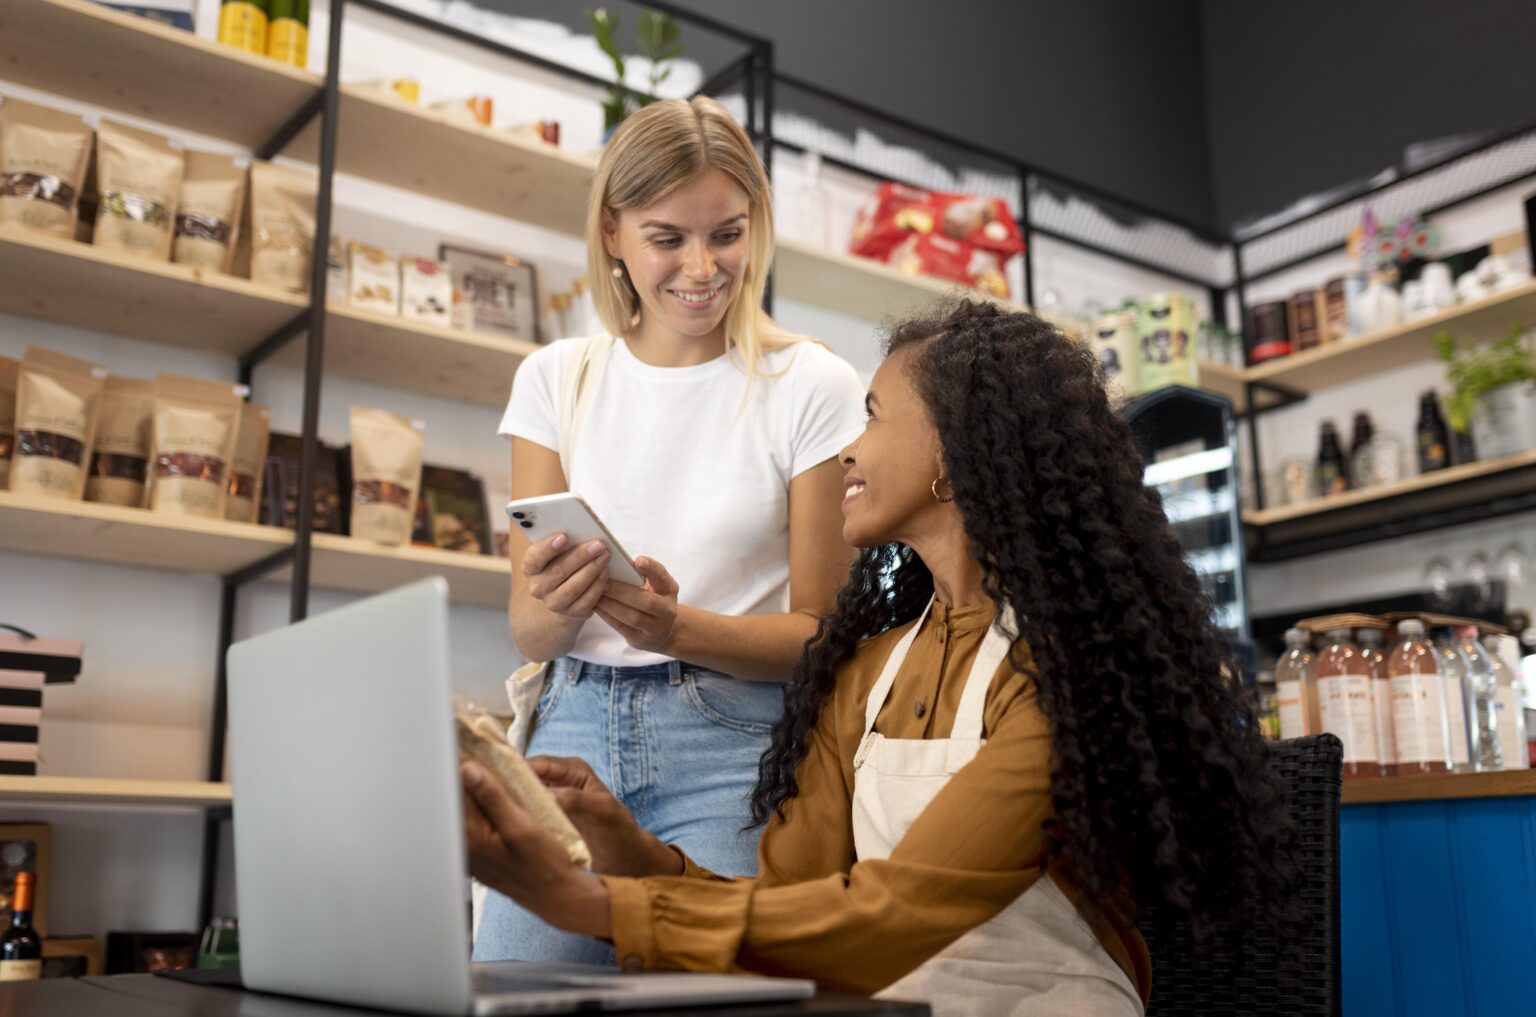 Leveraging customer data: The key to delivering personalized retail